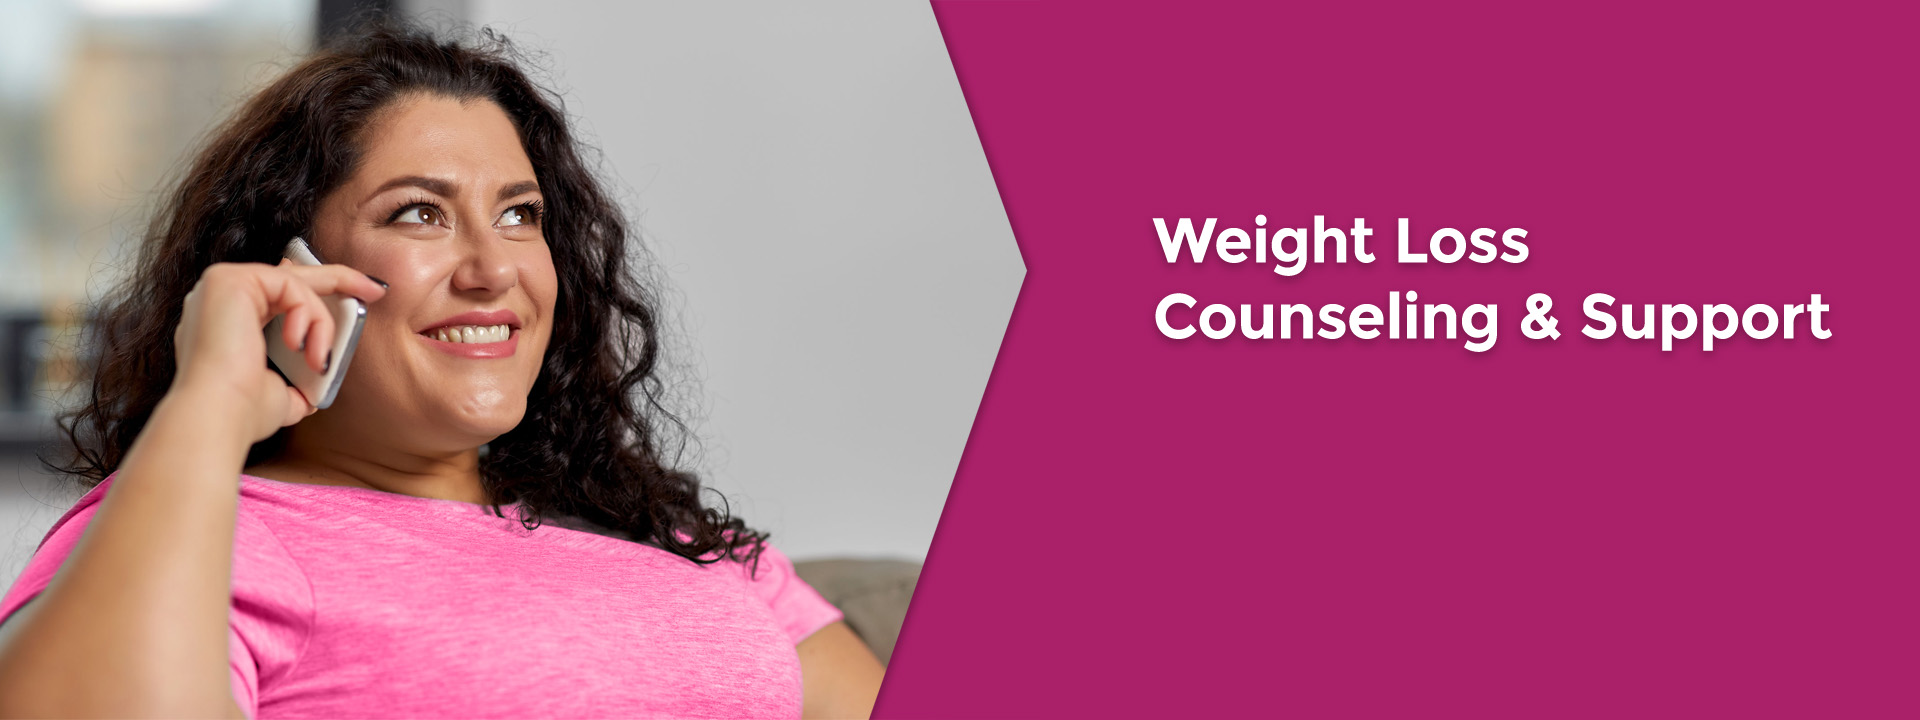 Weight Loss Counseling & Support in Harrisburg, Scranton Pennsylvania